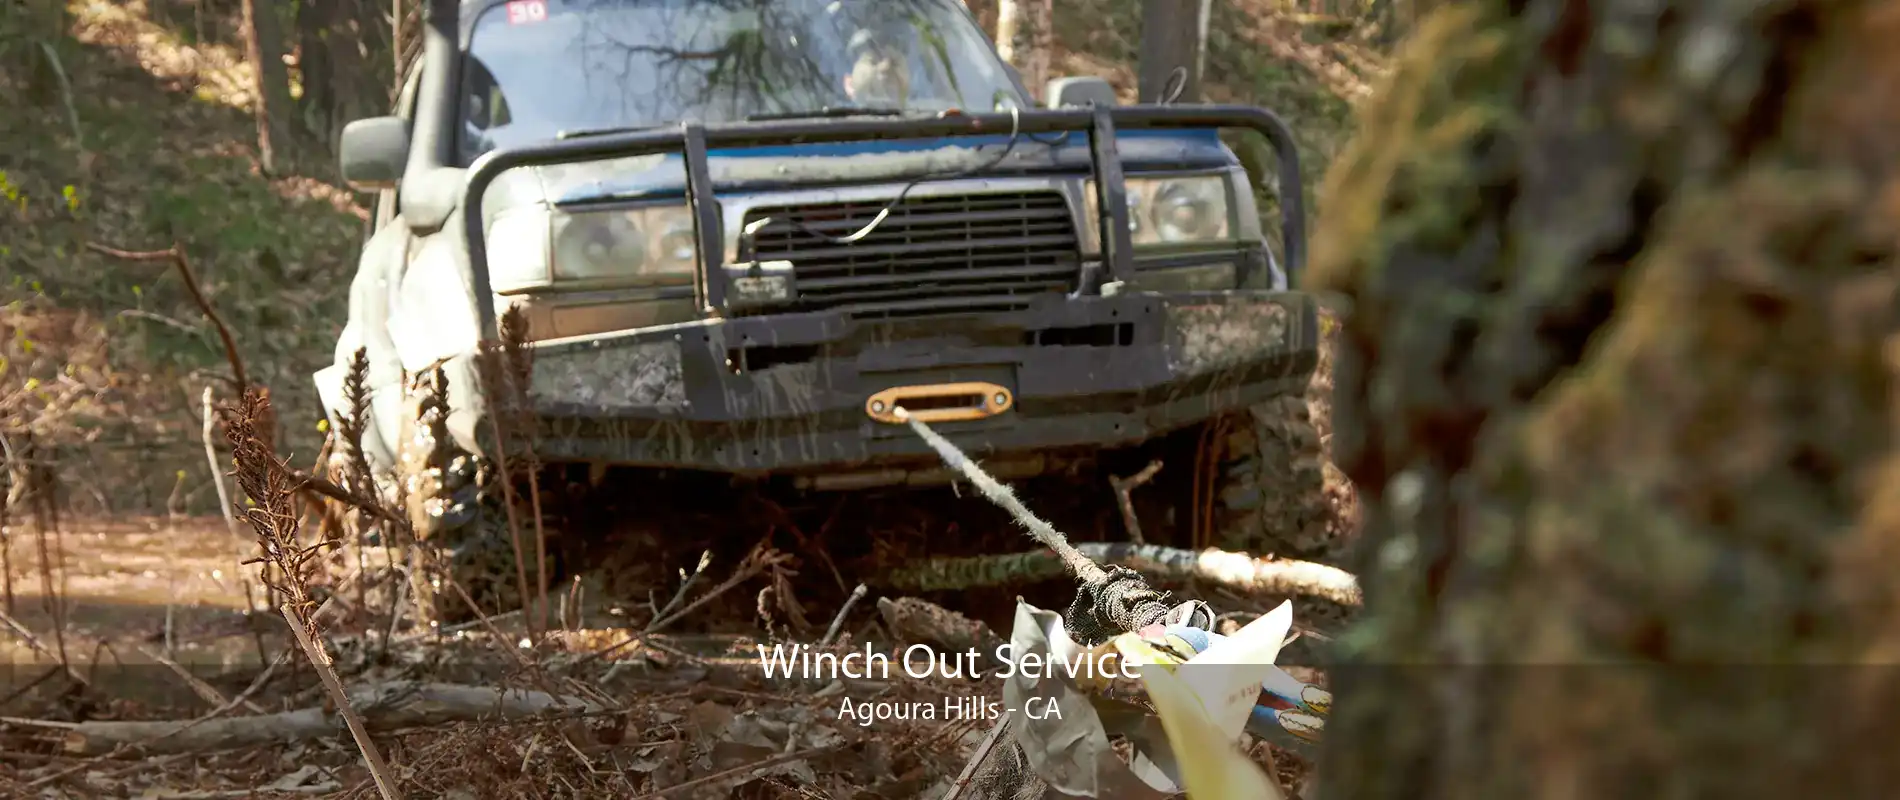 Winch Out Service Agoura Hills - CA